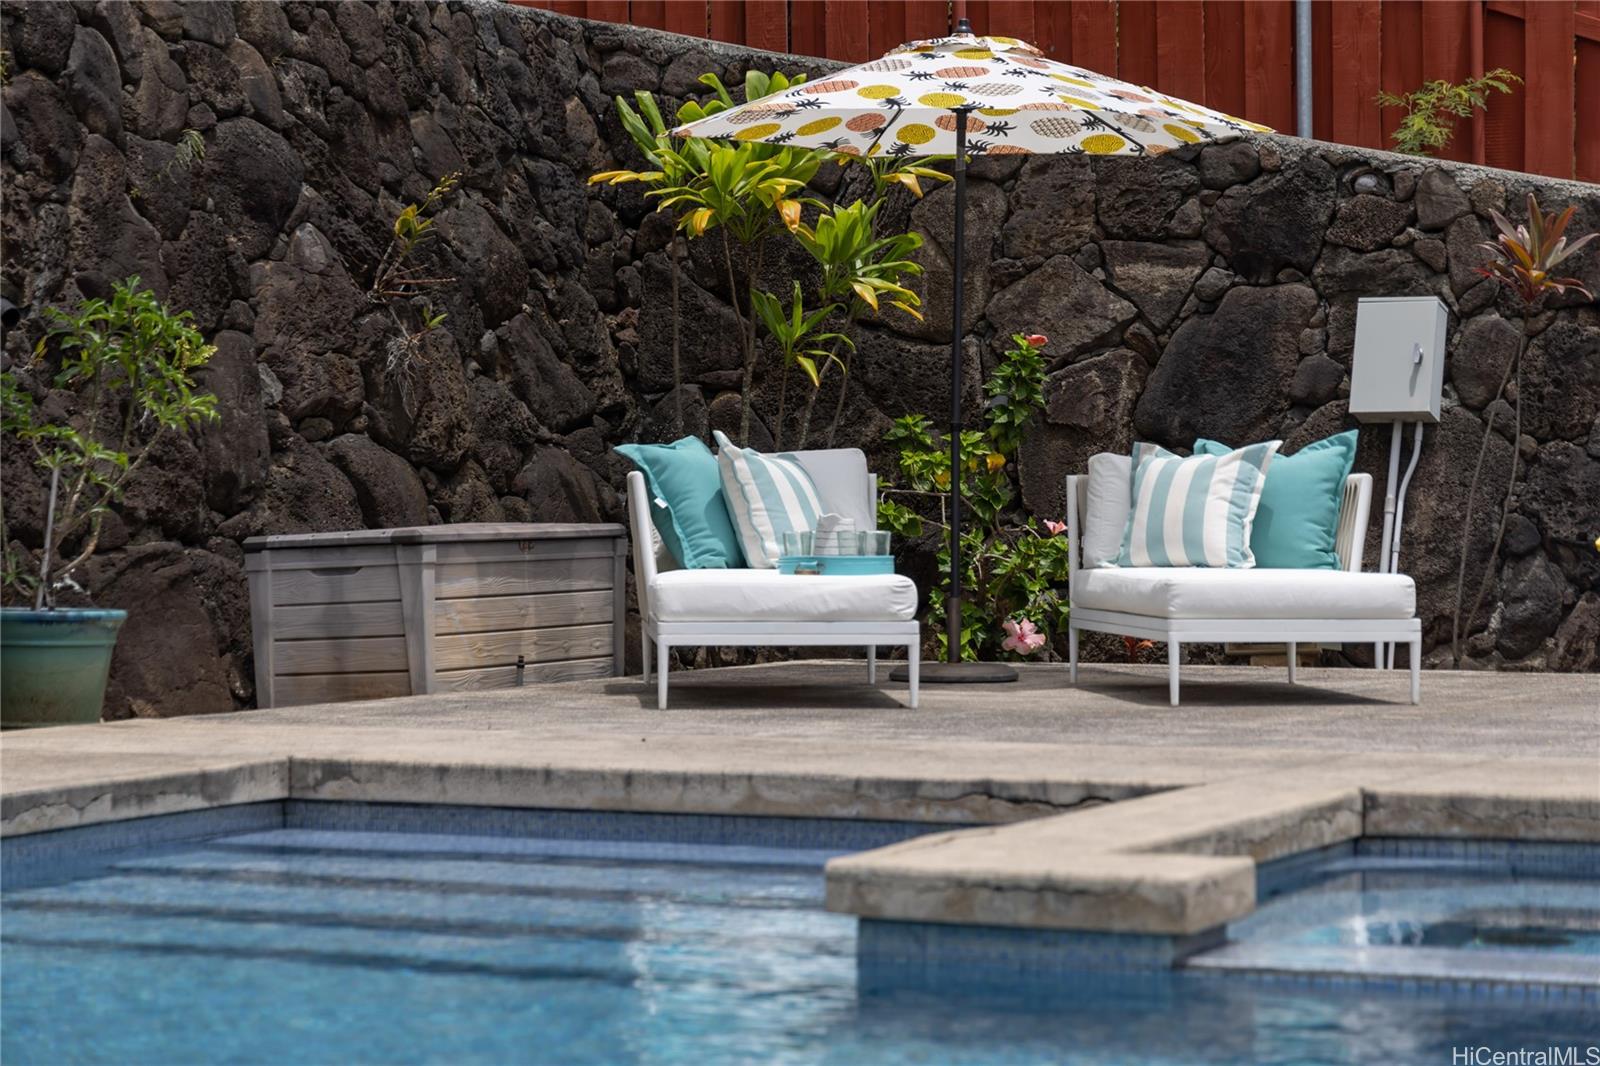 Enjoy your afternoon lounging poolside.